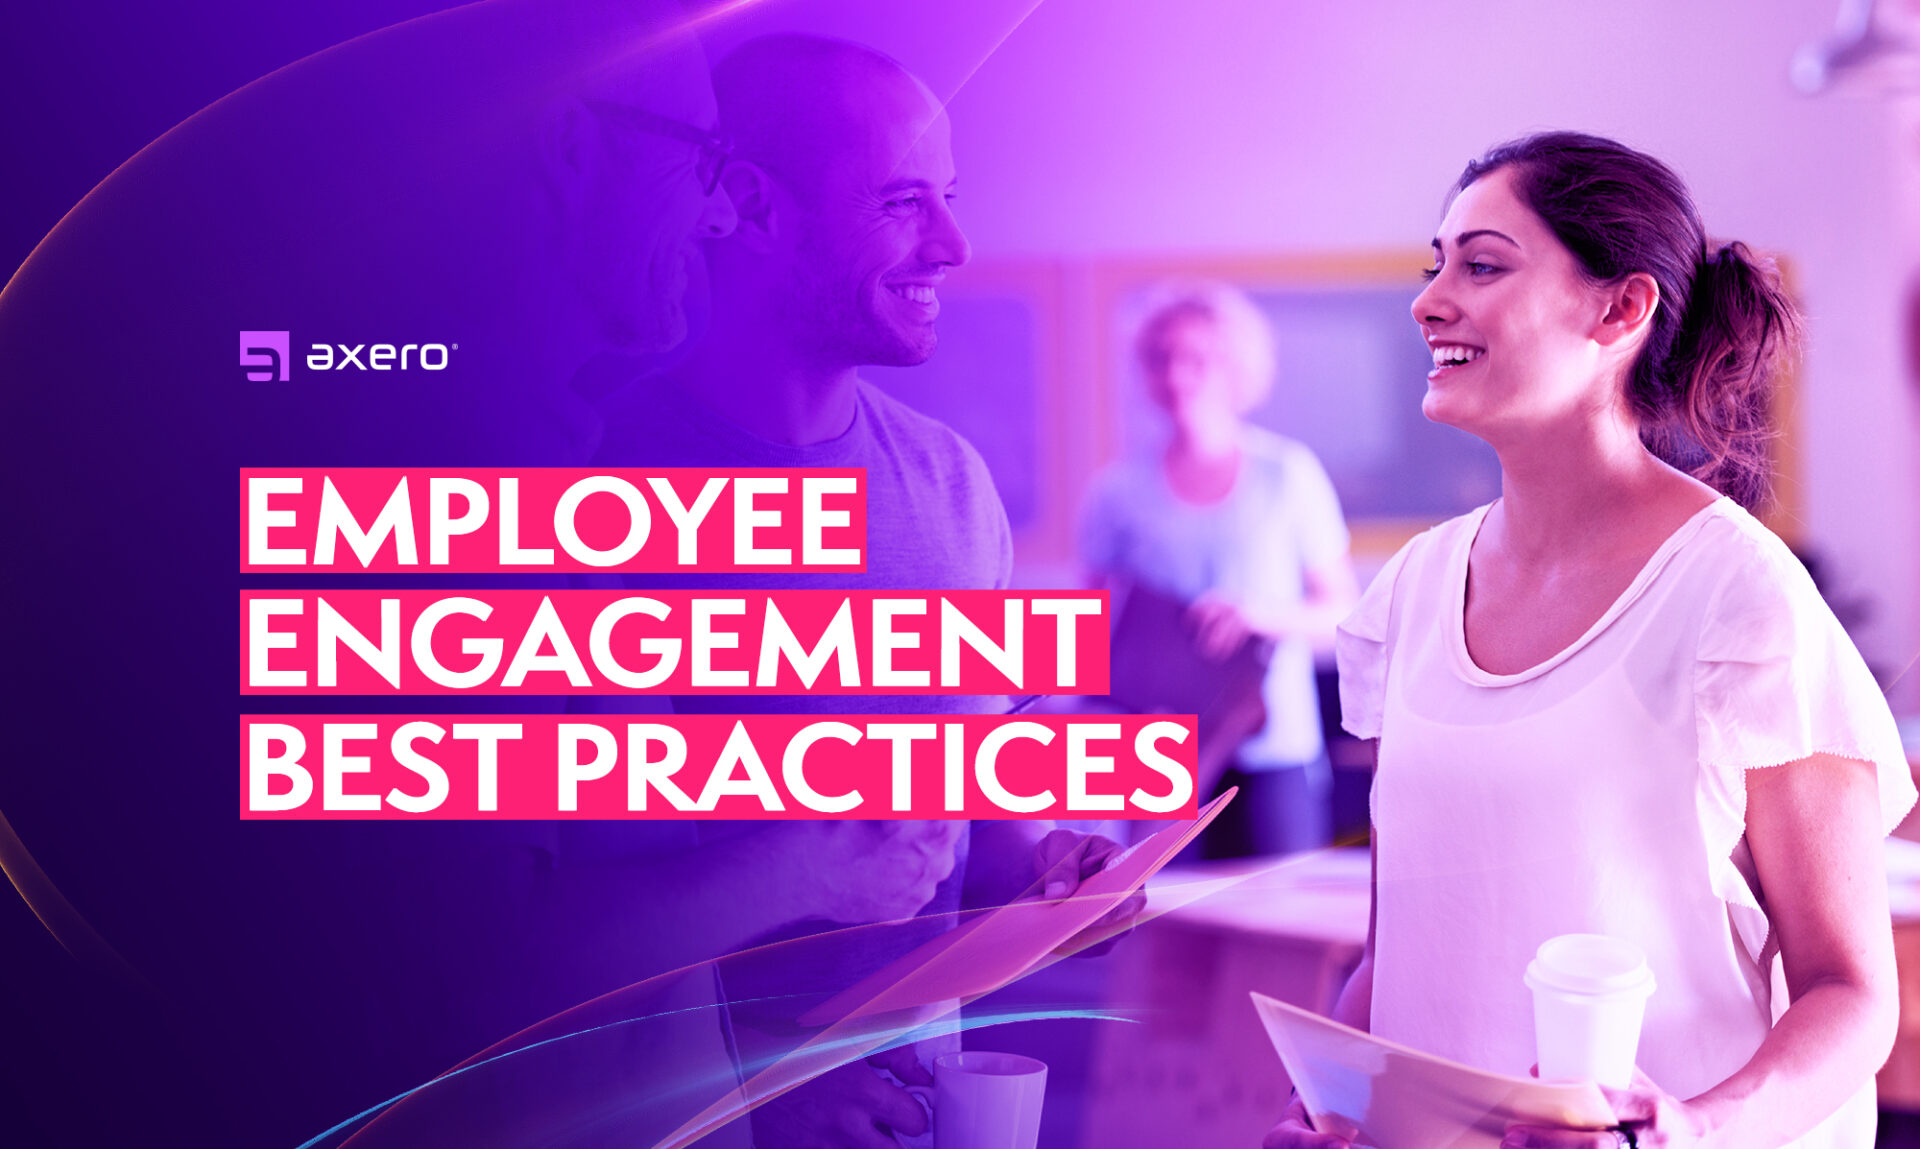 14 Employee Engagement Best Practices that are Simple and Effective